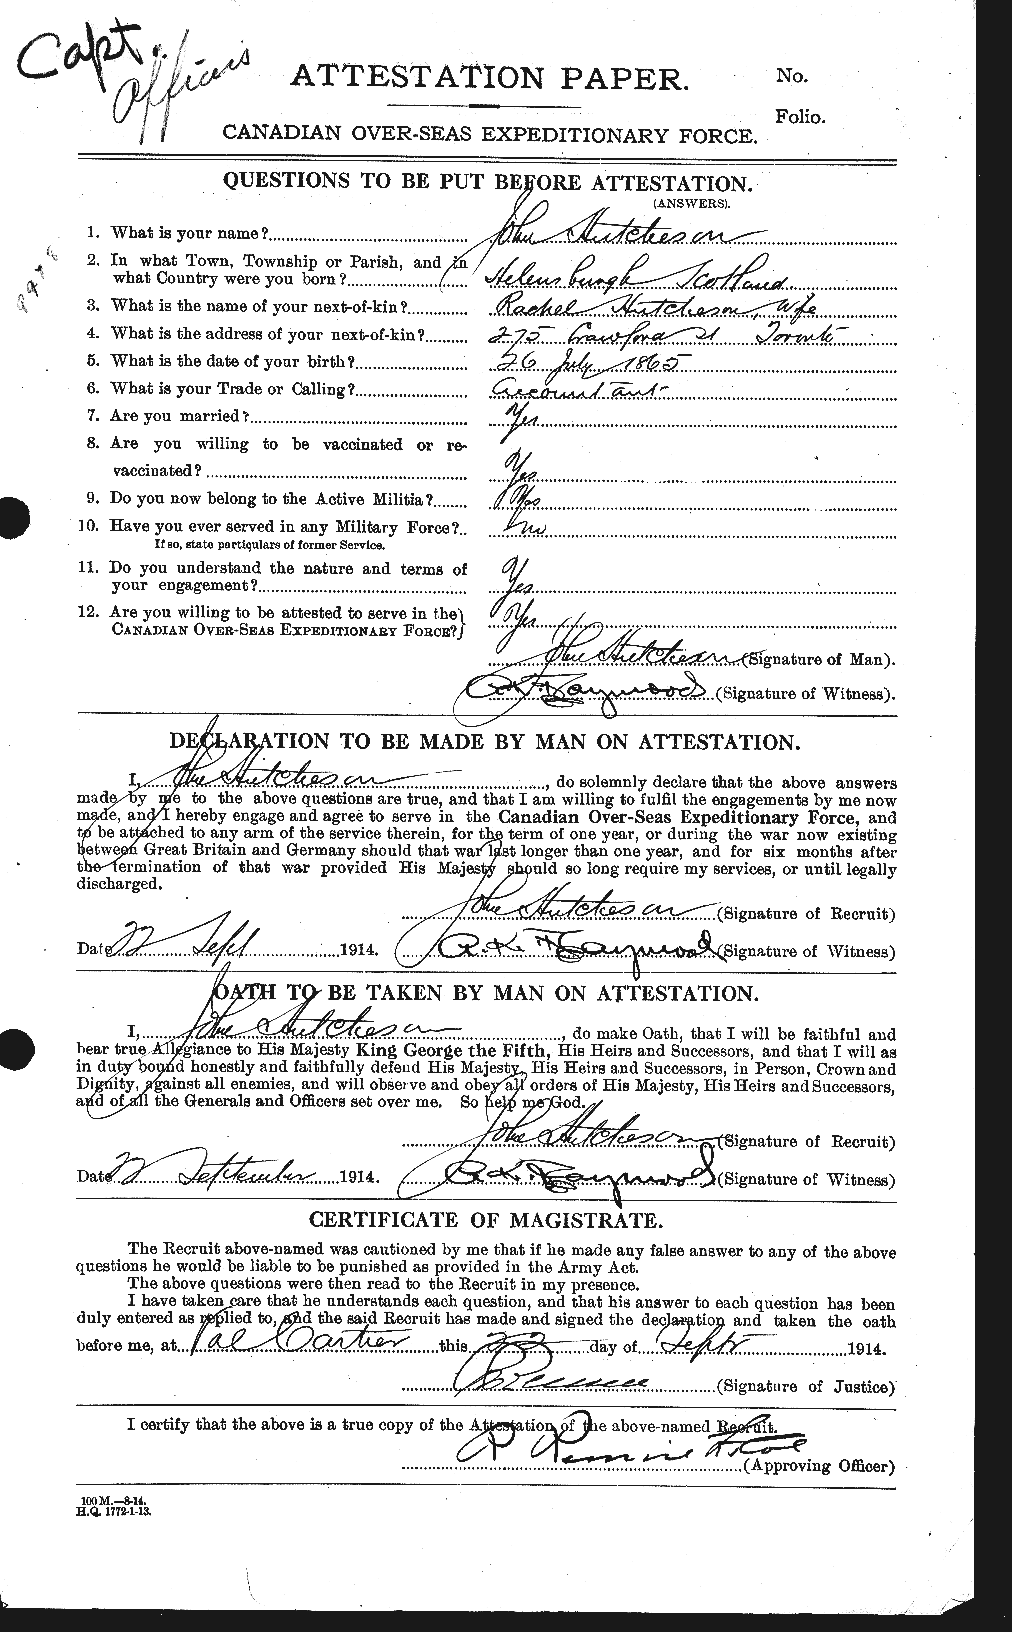 Personnel Records of the First World War - CEF 407976a